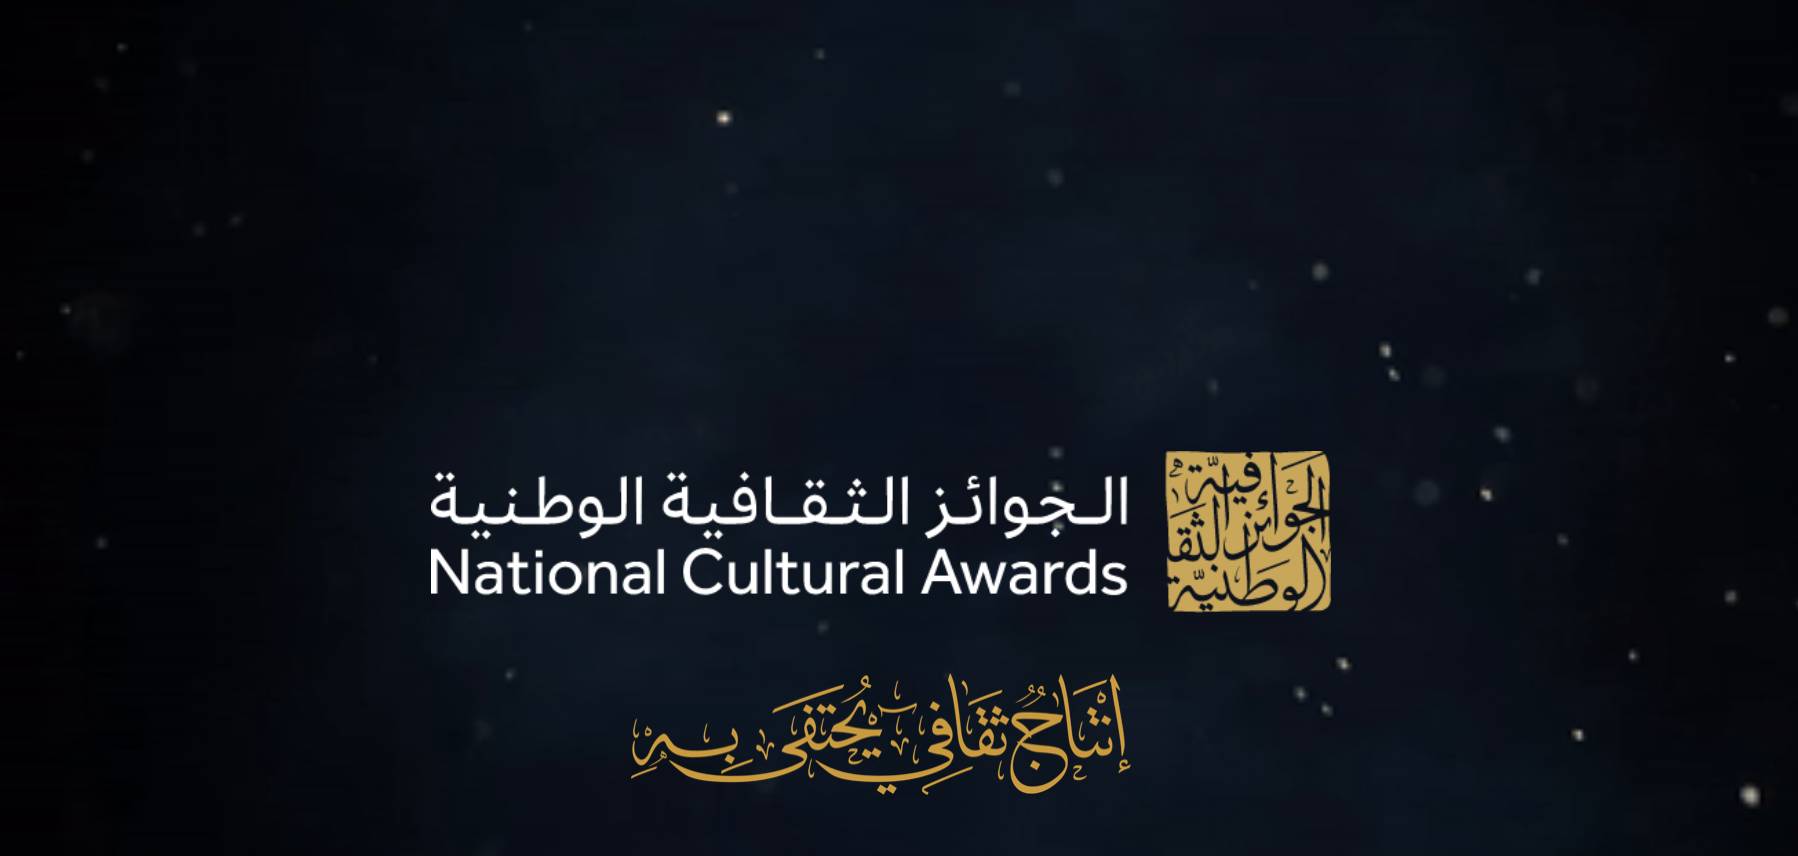 Ministry of Culture launches ‘National Cultural Awards’ initiative